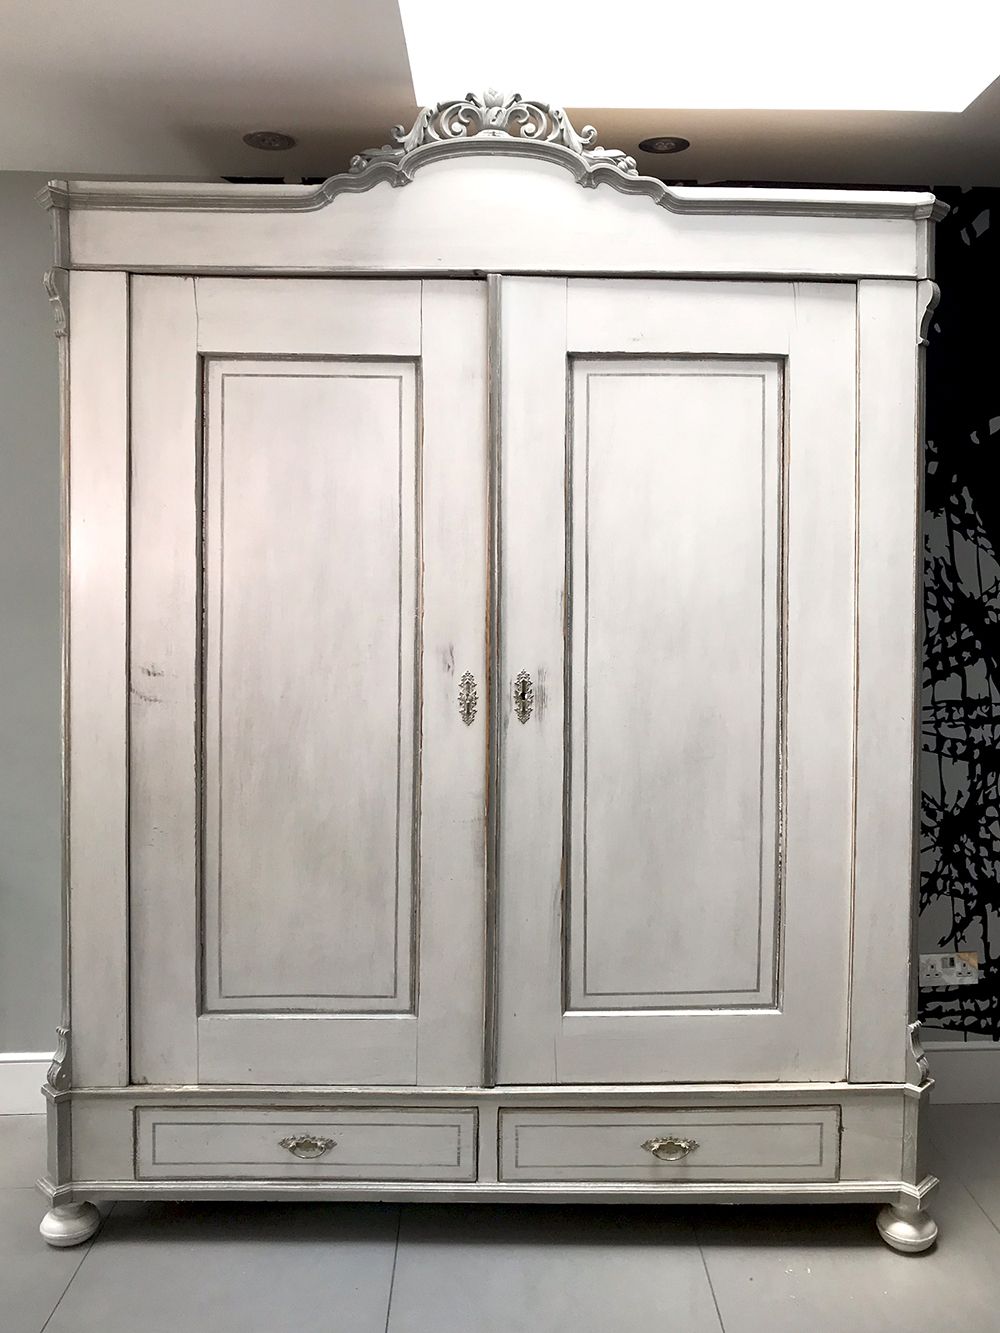 Antique French Painted Armoire – Sold | Napoleonrockefeller – Vintage And  Retro Furniture, Bespoke Hand Crafted Chairs And Seating Pertaining To Antique French Wardrobes (View 5 of 15)